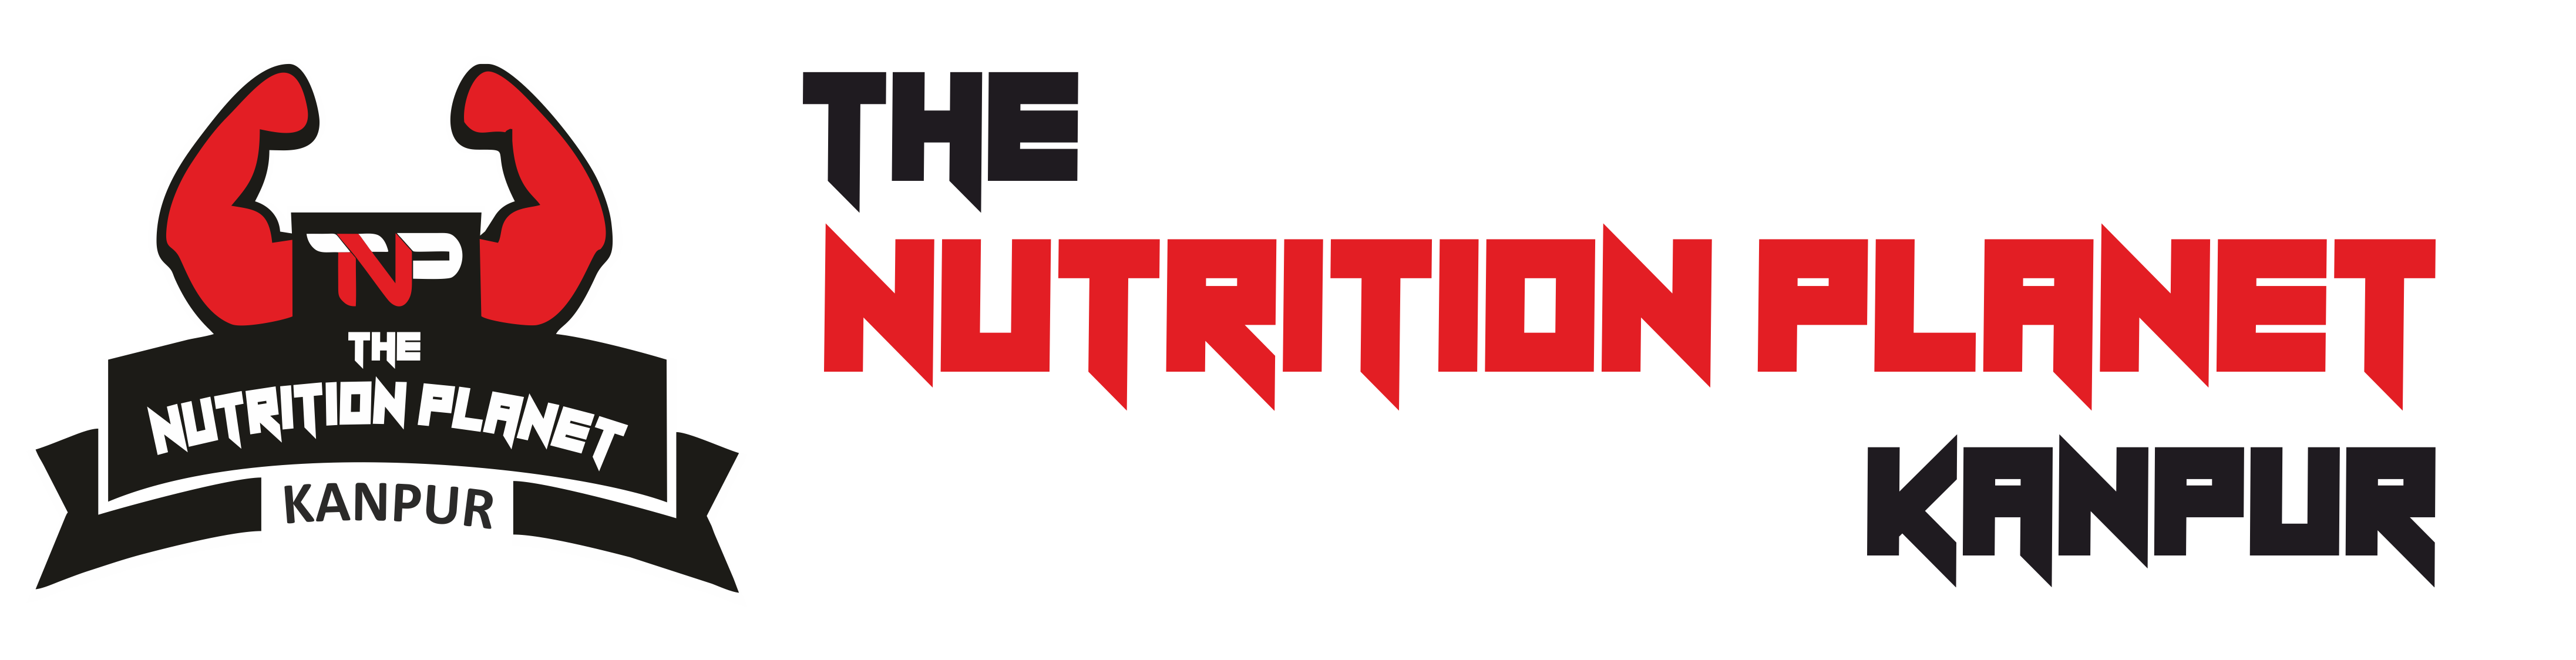 The Nutrition Planet Kanpur